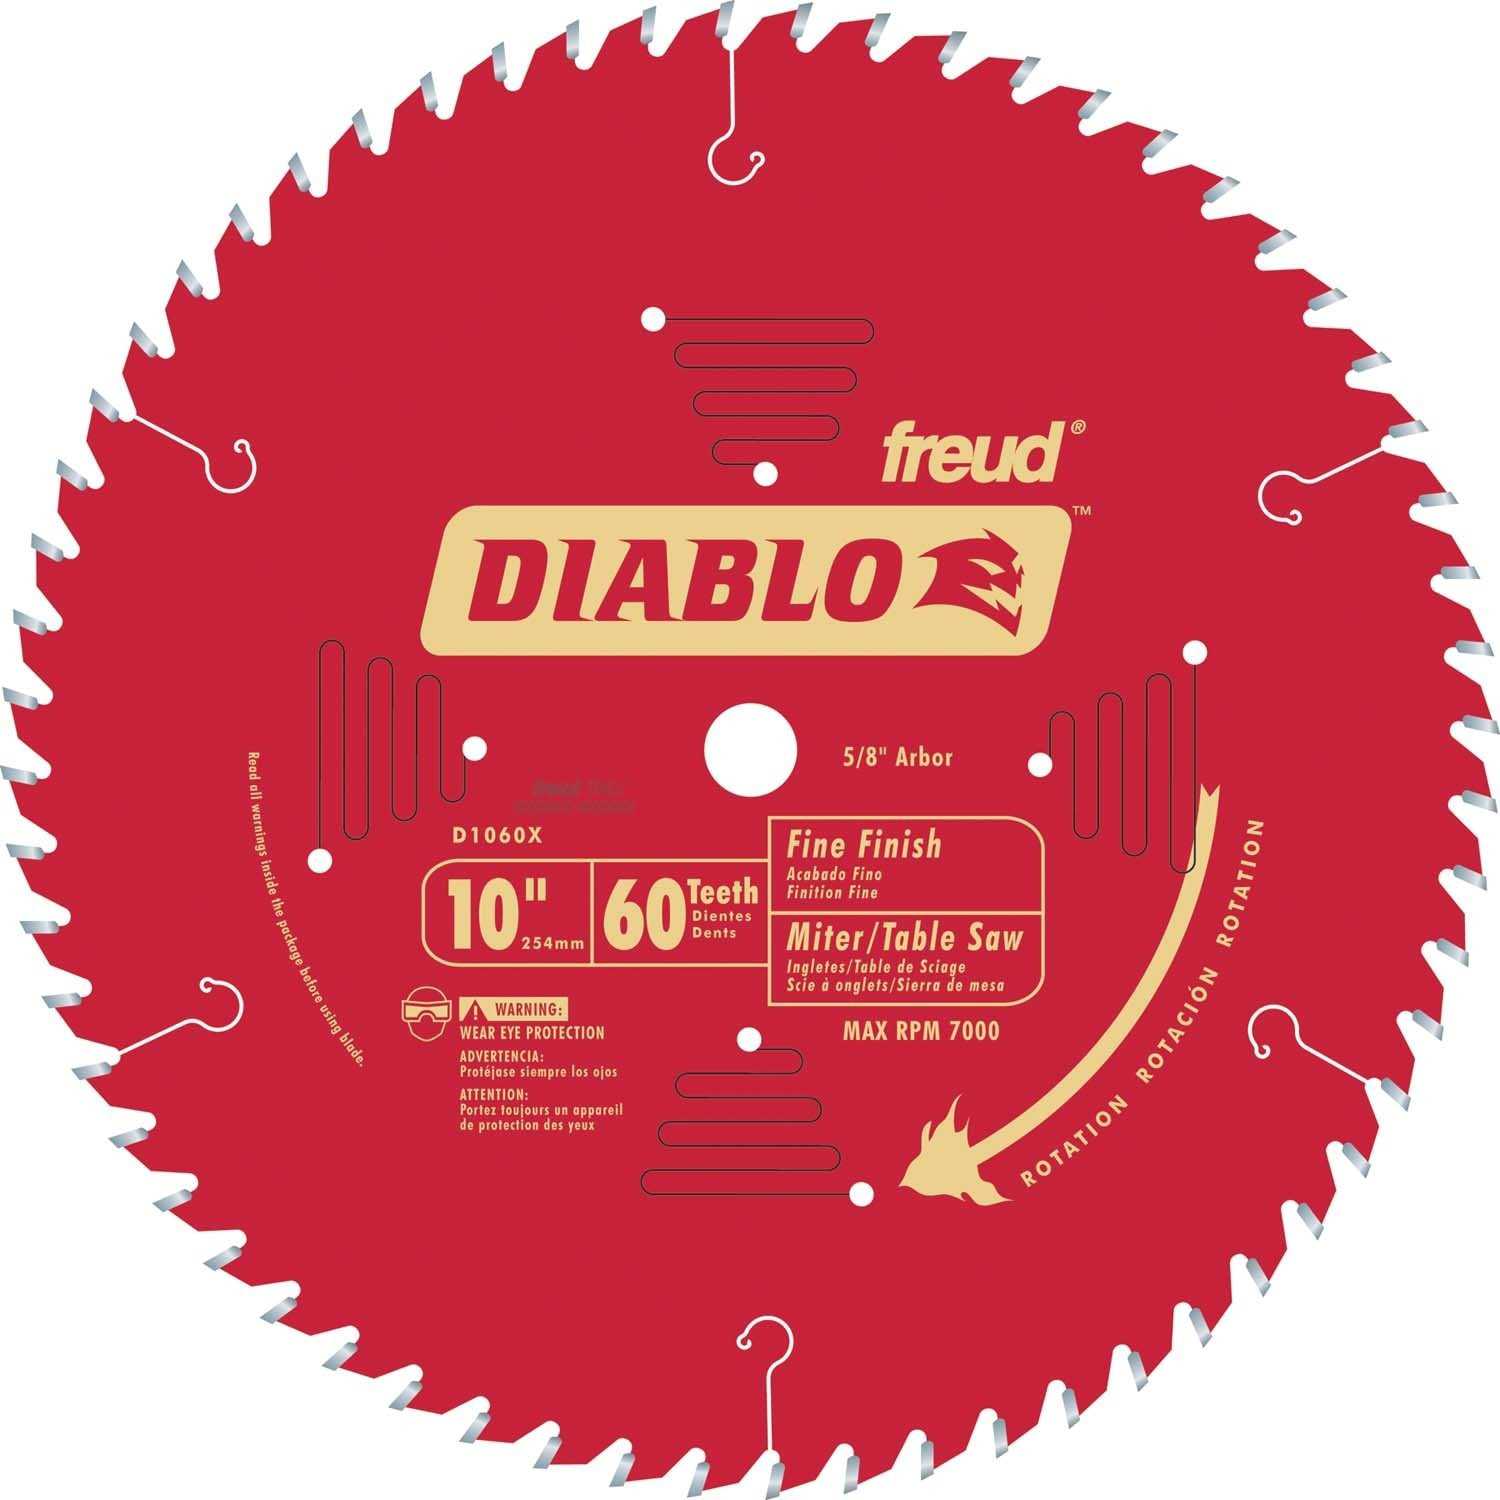 Diablo D1060X 10' 60T Fine Finish Work Chop Miter and Table Saw Bl